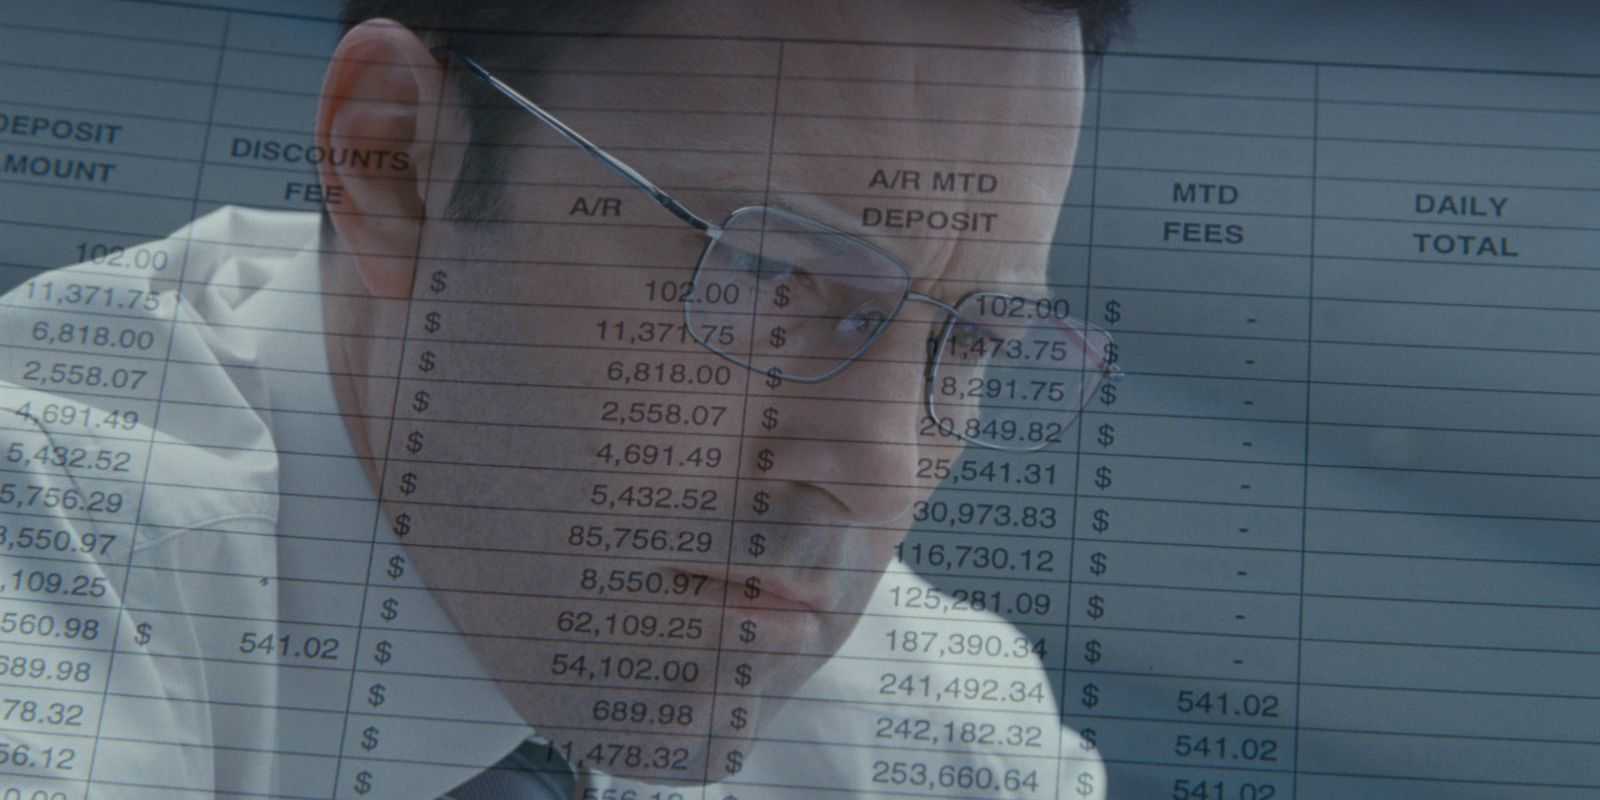 A transparent image of Ben Affleck wearing glasses from The Accountant over a document with money totals